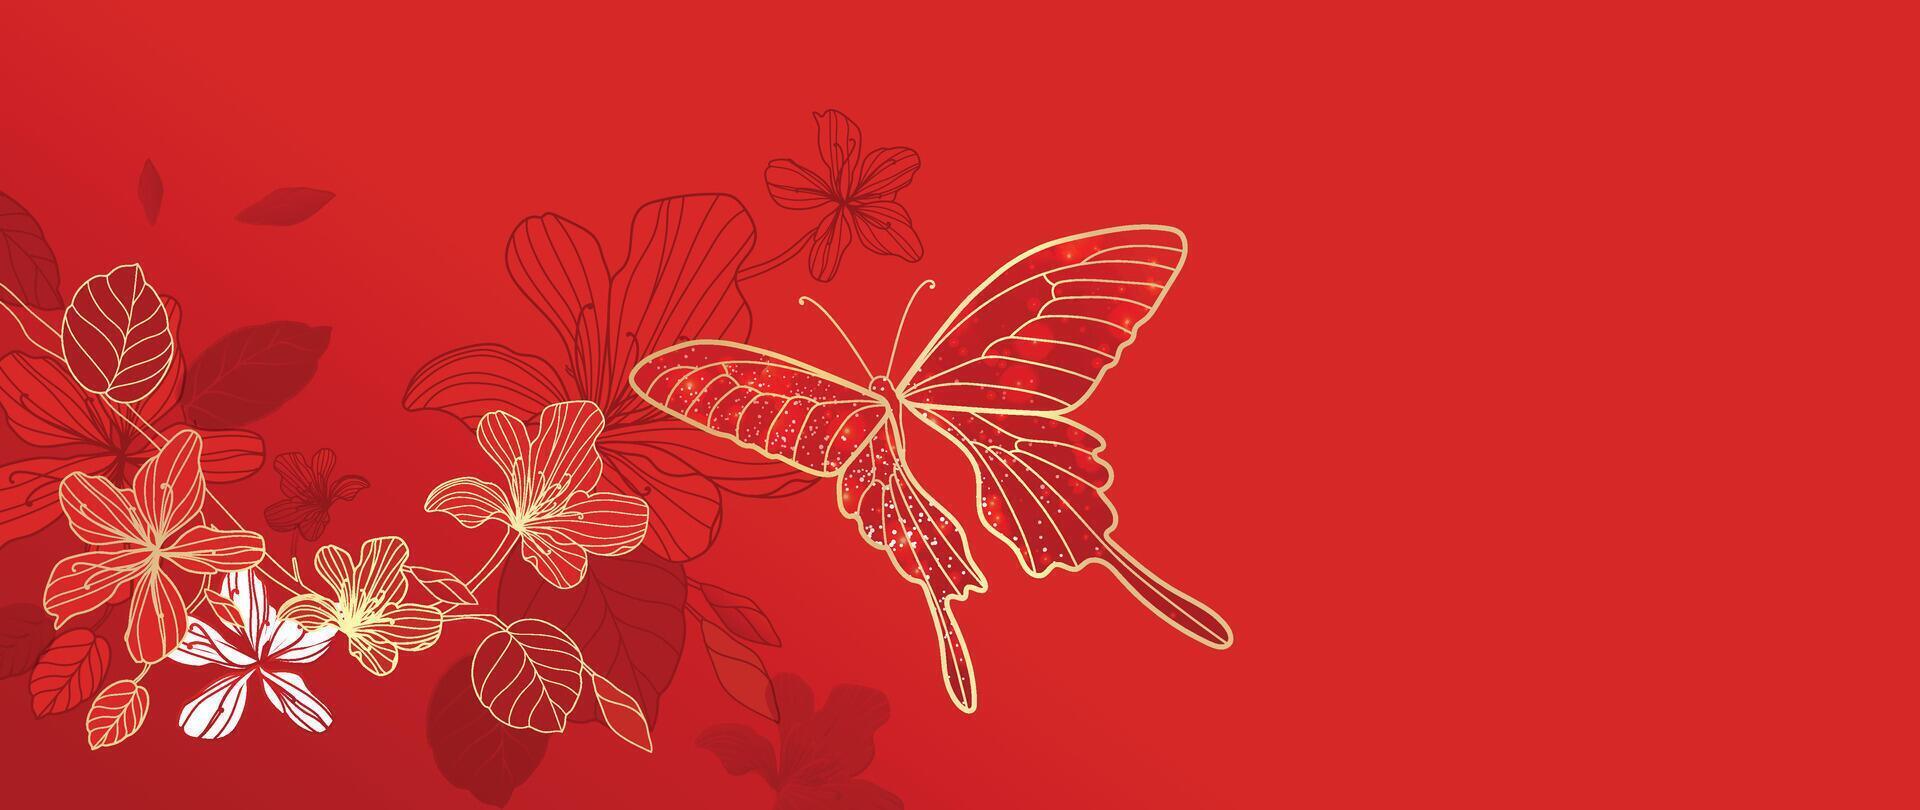 Happy Chinese new year background . Luxury wallpaper design with chinese flower, butterfly on red background. Modern luxury oriental illustration for cover, banner, website, decor. vector